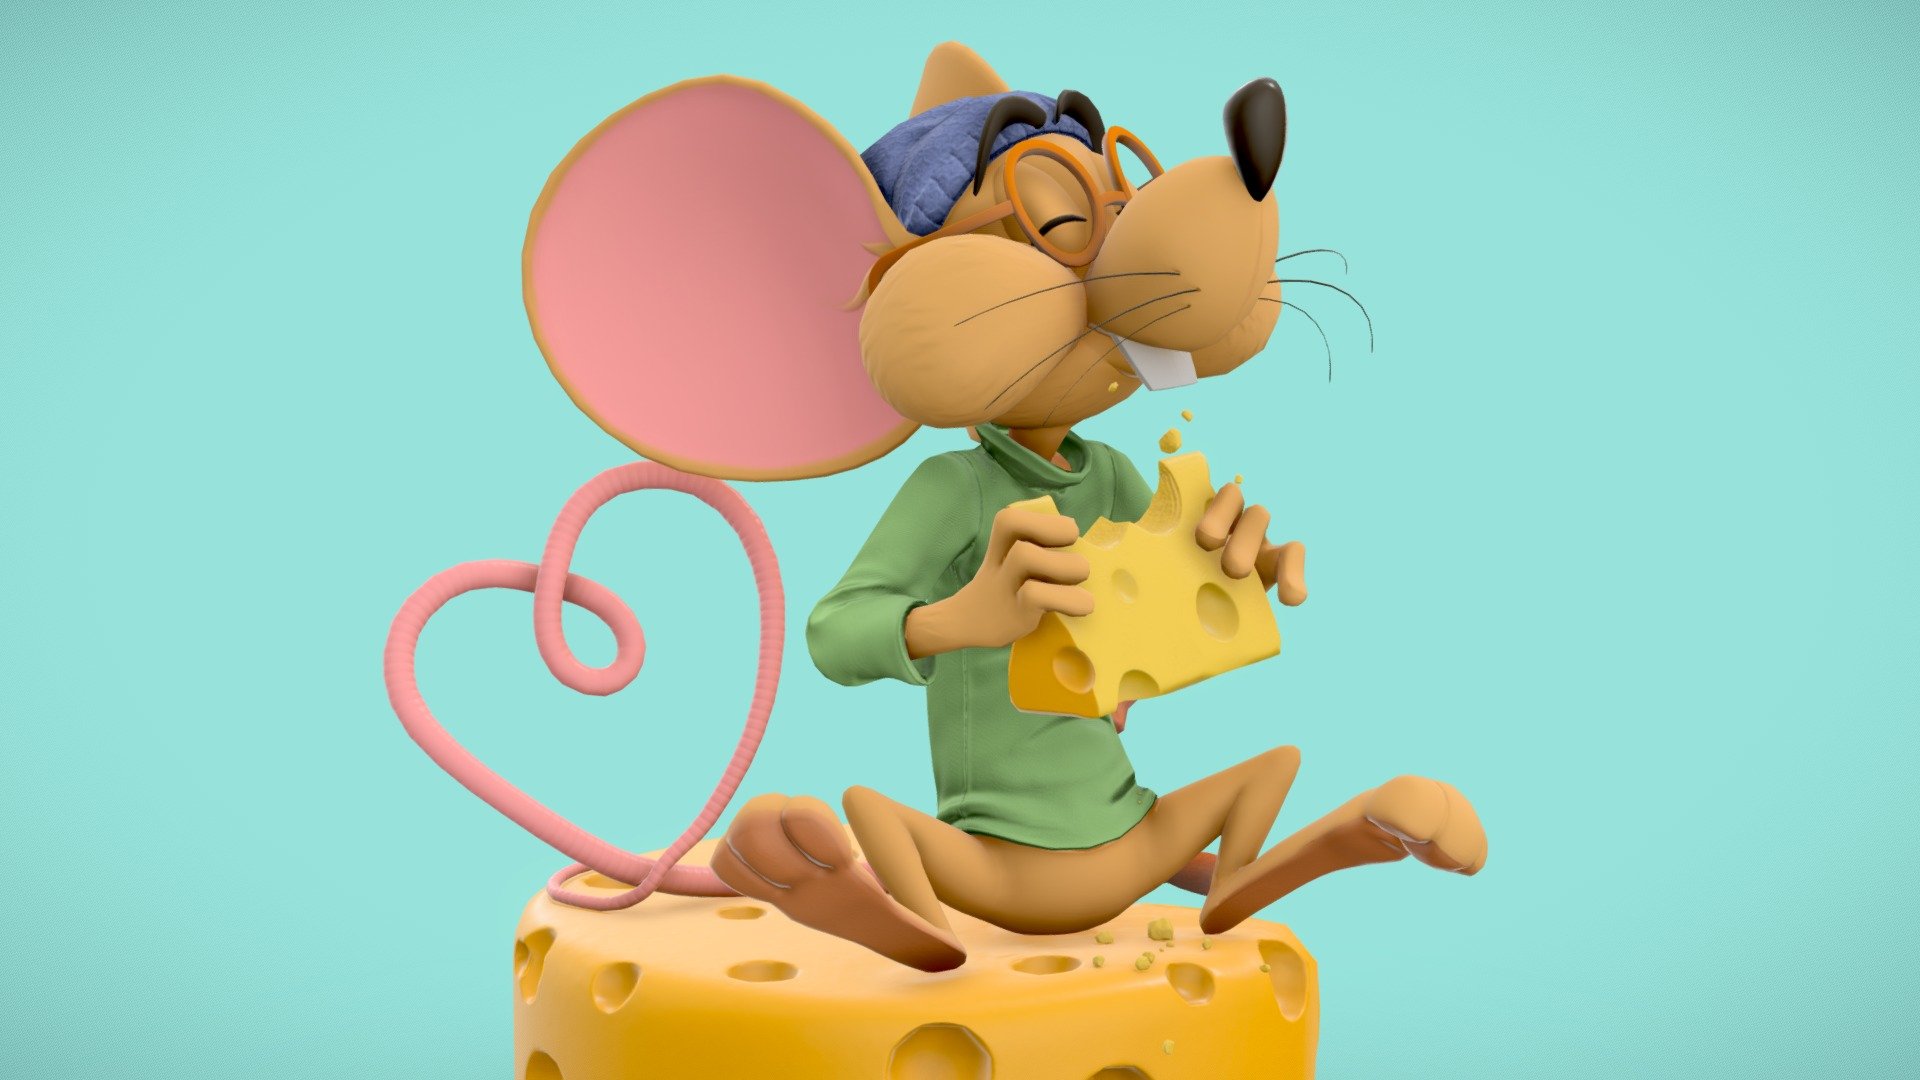 Cheddar is a character originally designed by my friend Ye Aung (https://twitter.com/Yeaunganimation).

This project is another 3D-conversion of a 2D character design. 
He was fist sculpted in ZBrush; then retopo'd/UV'd in Blender (2.92) + Retopoflow + ZenUV + UVPackMaster2 Pro; and finally painted in Substance Painter 3d model